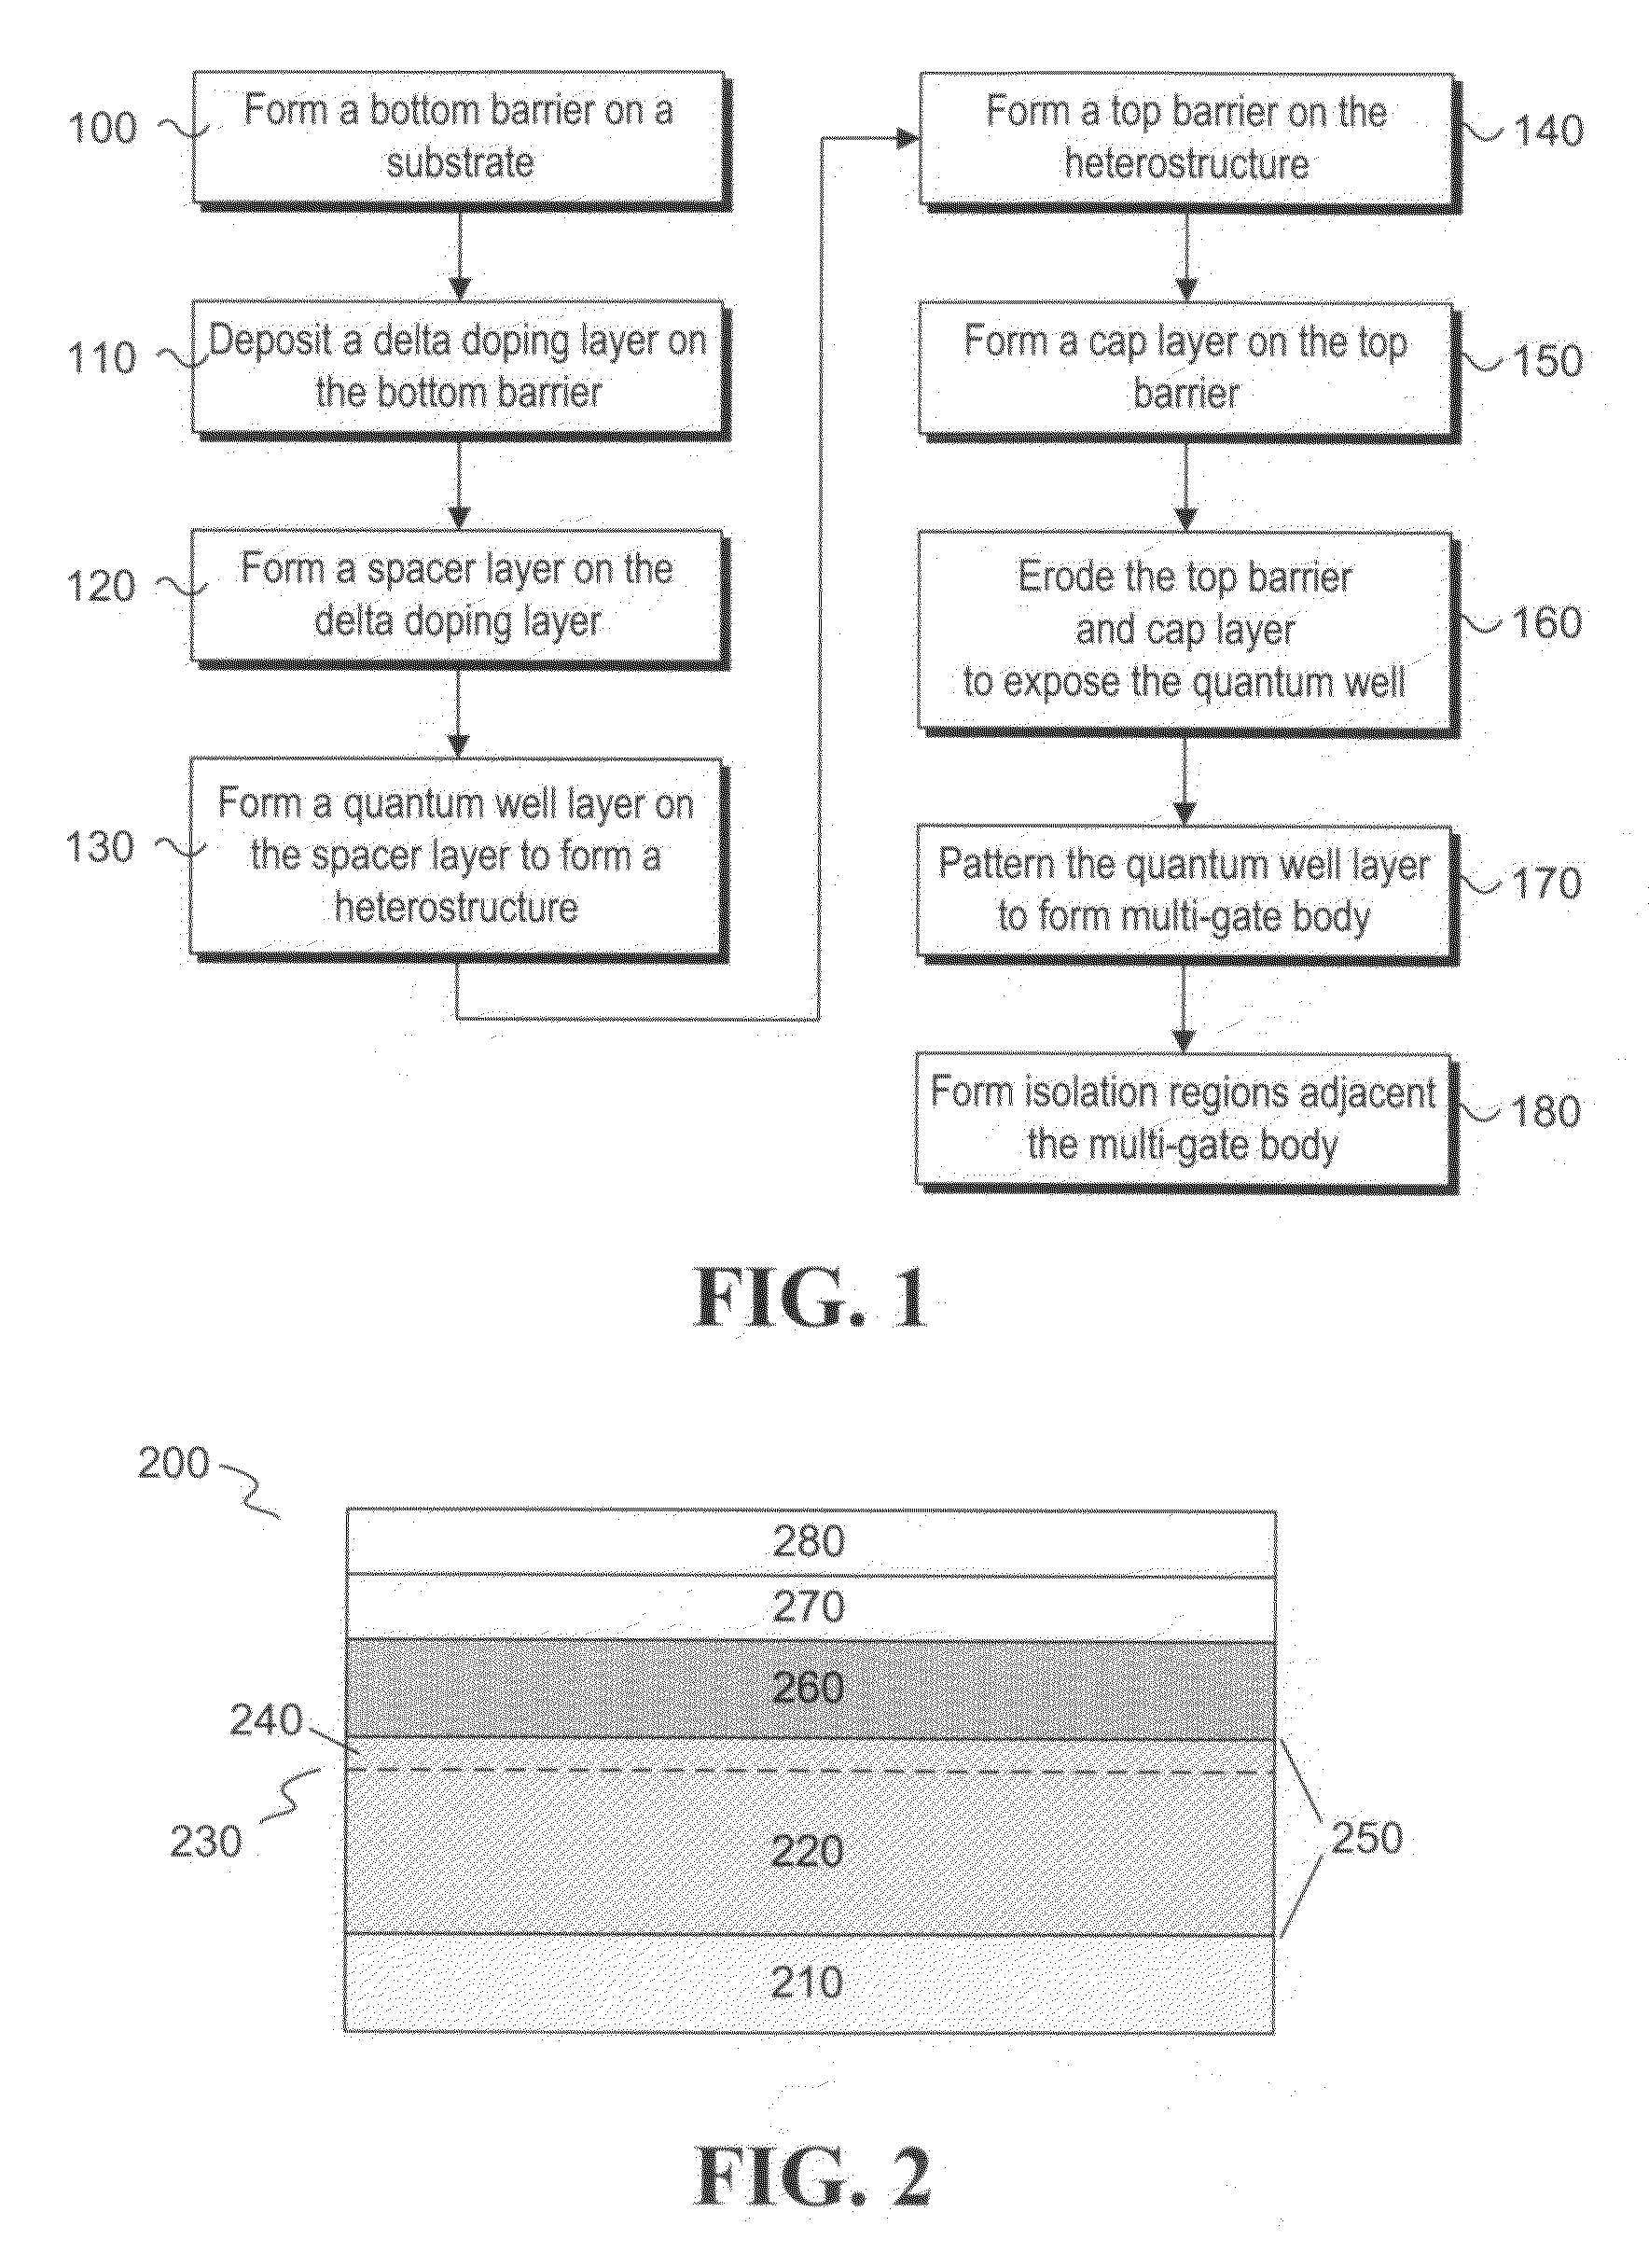 Apparatus and methods for forming a modulation doped non-planar transistor